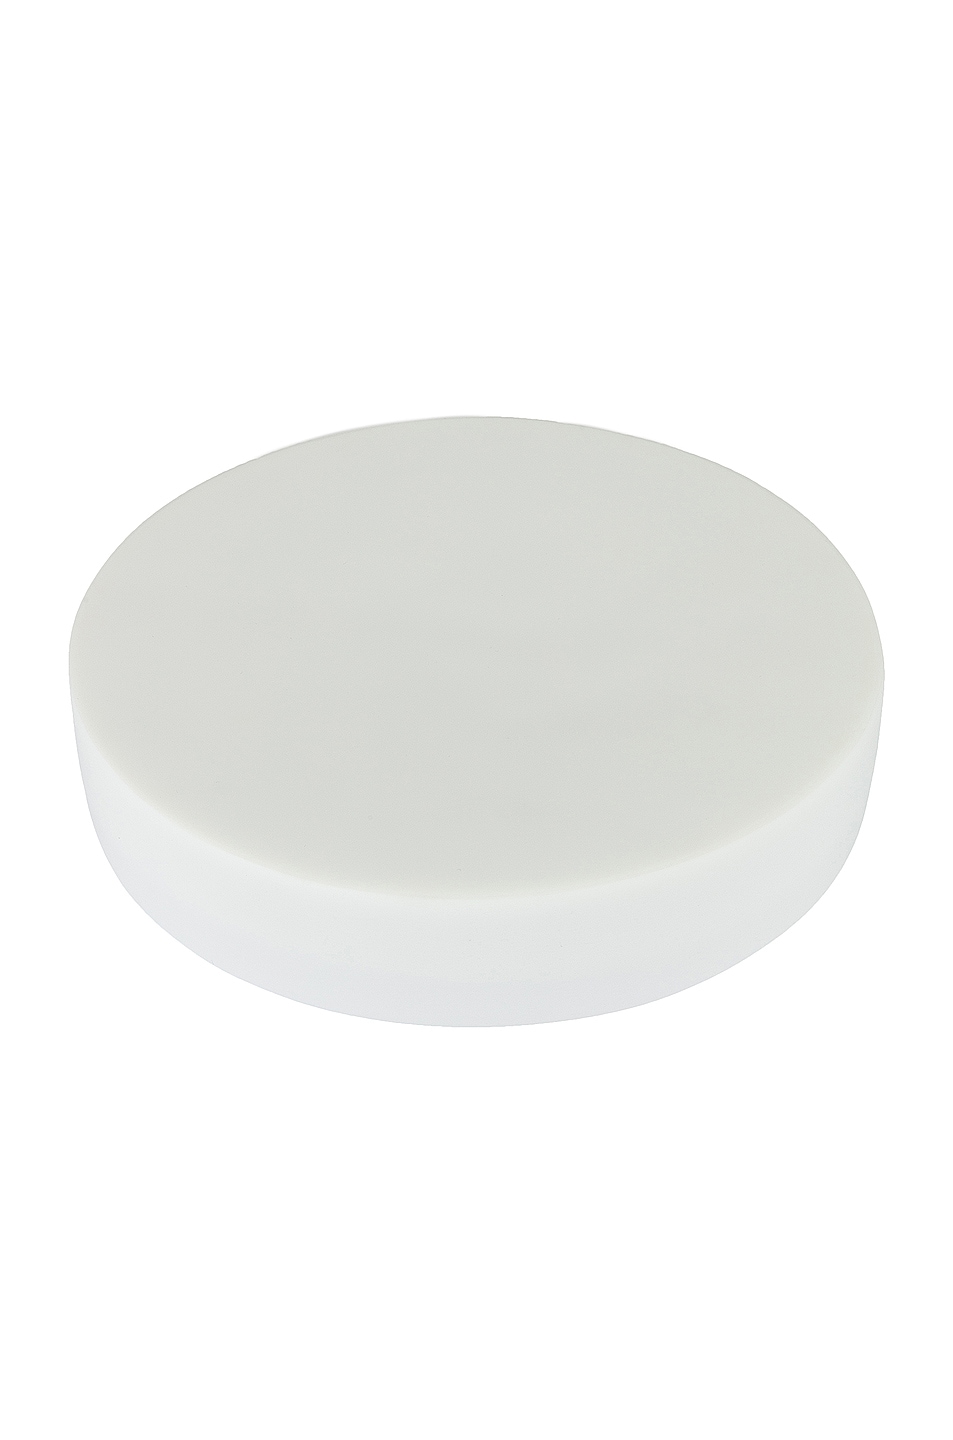 Image 1 of Tina Frey Designs Small Plateau Platter in White